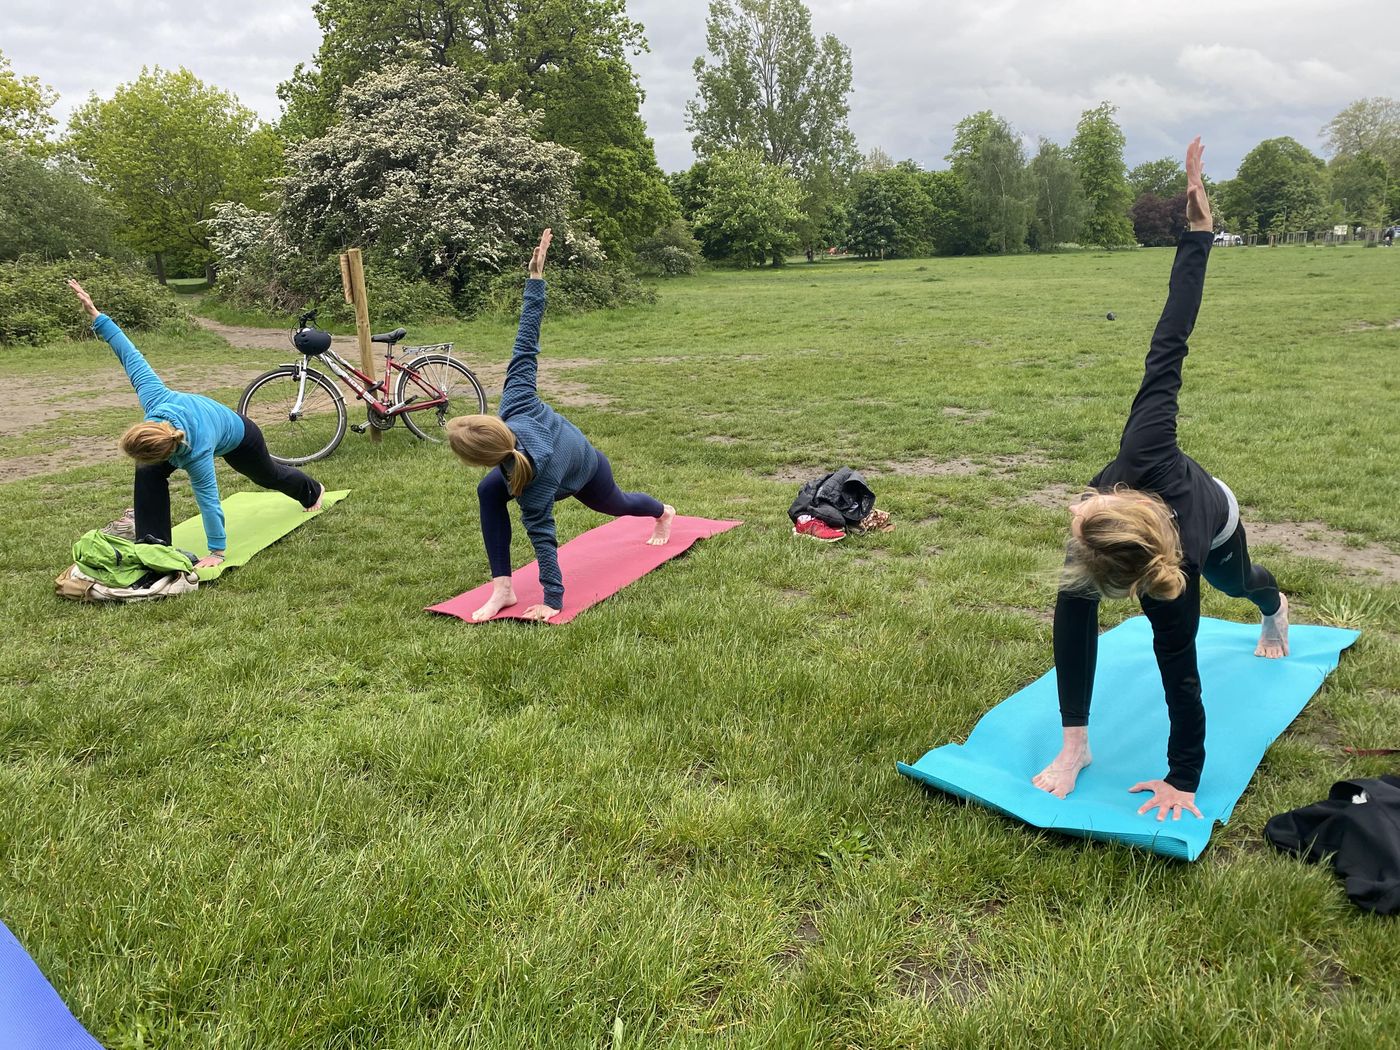 Good news! After a short hiatus, quarantining,  yoga is back on this coming Saturday 10am Kennington Park . See you soon!